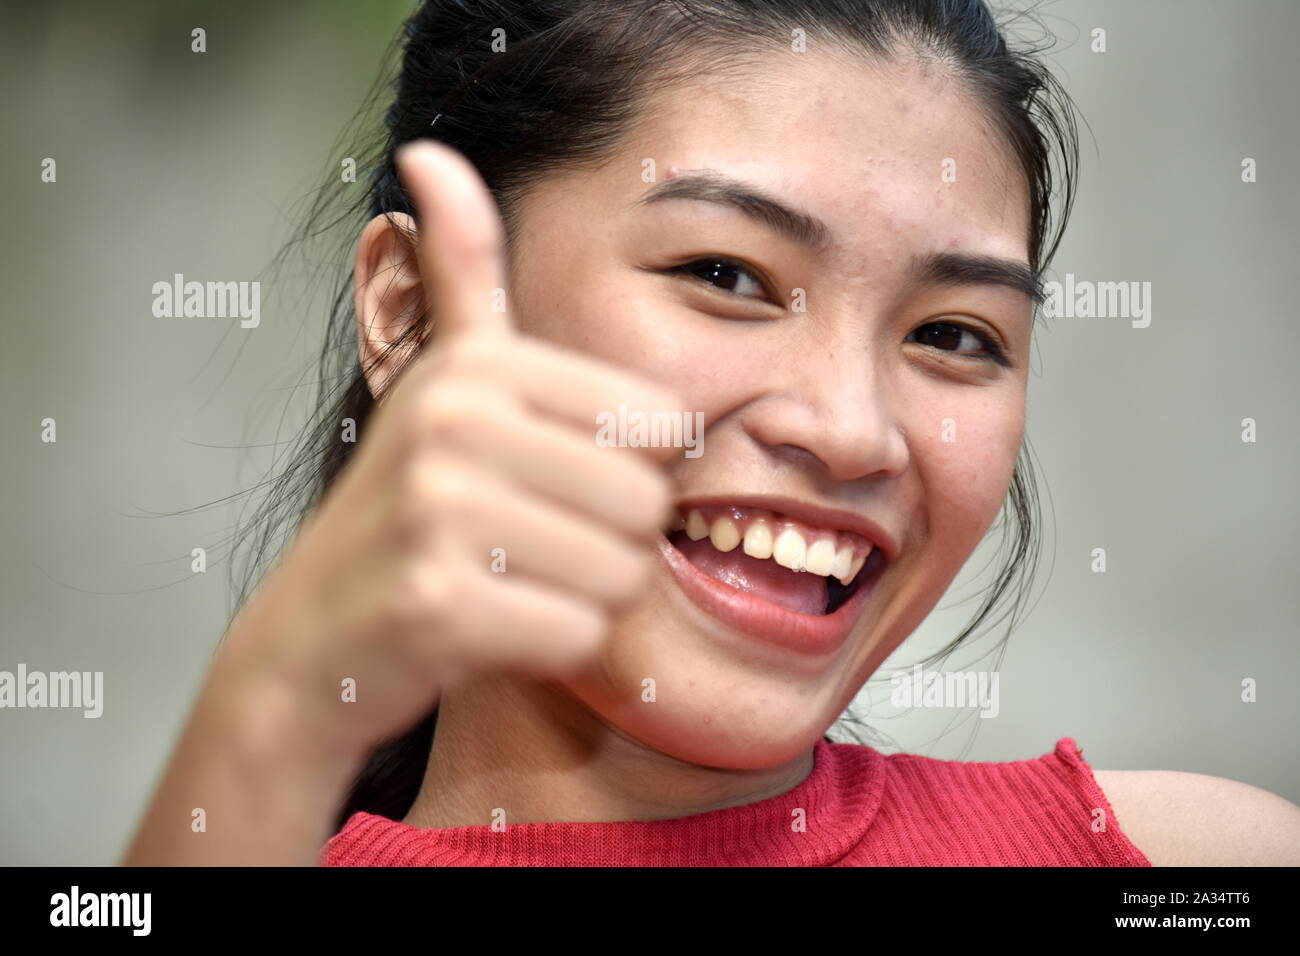 Youthful Minority Girl With Thumbs Up Stock Photo